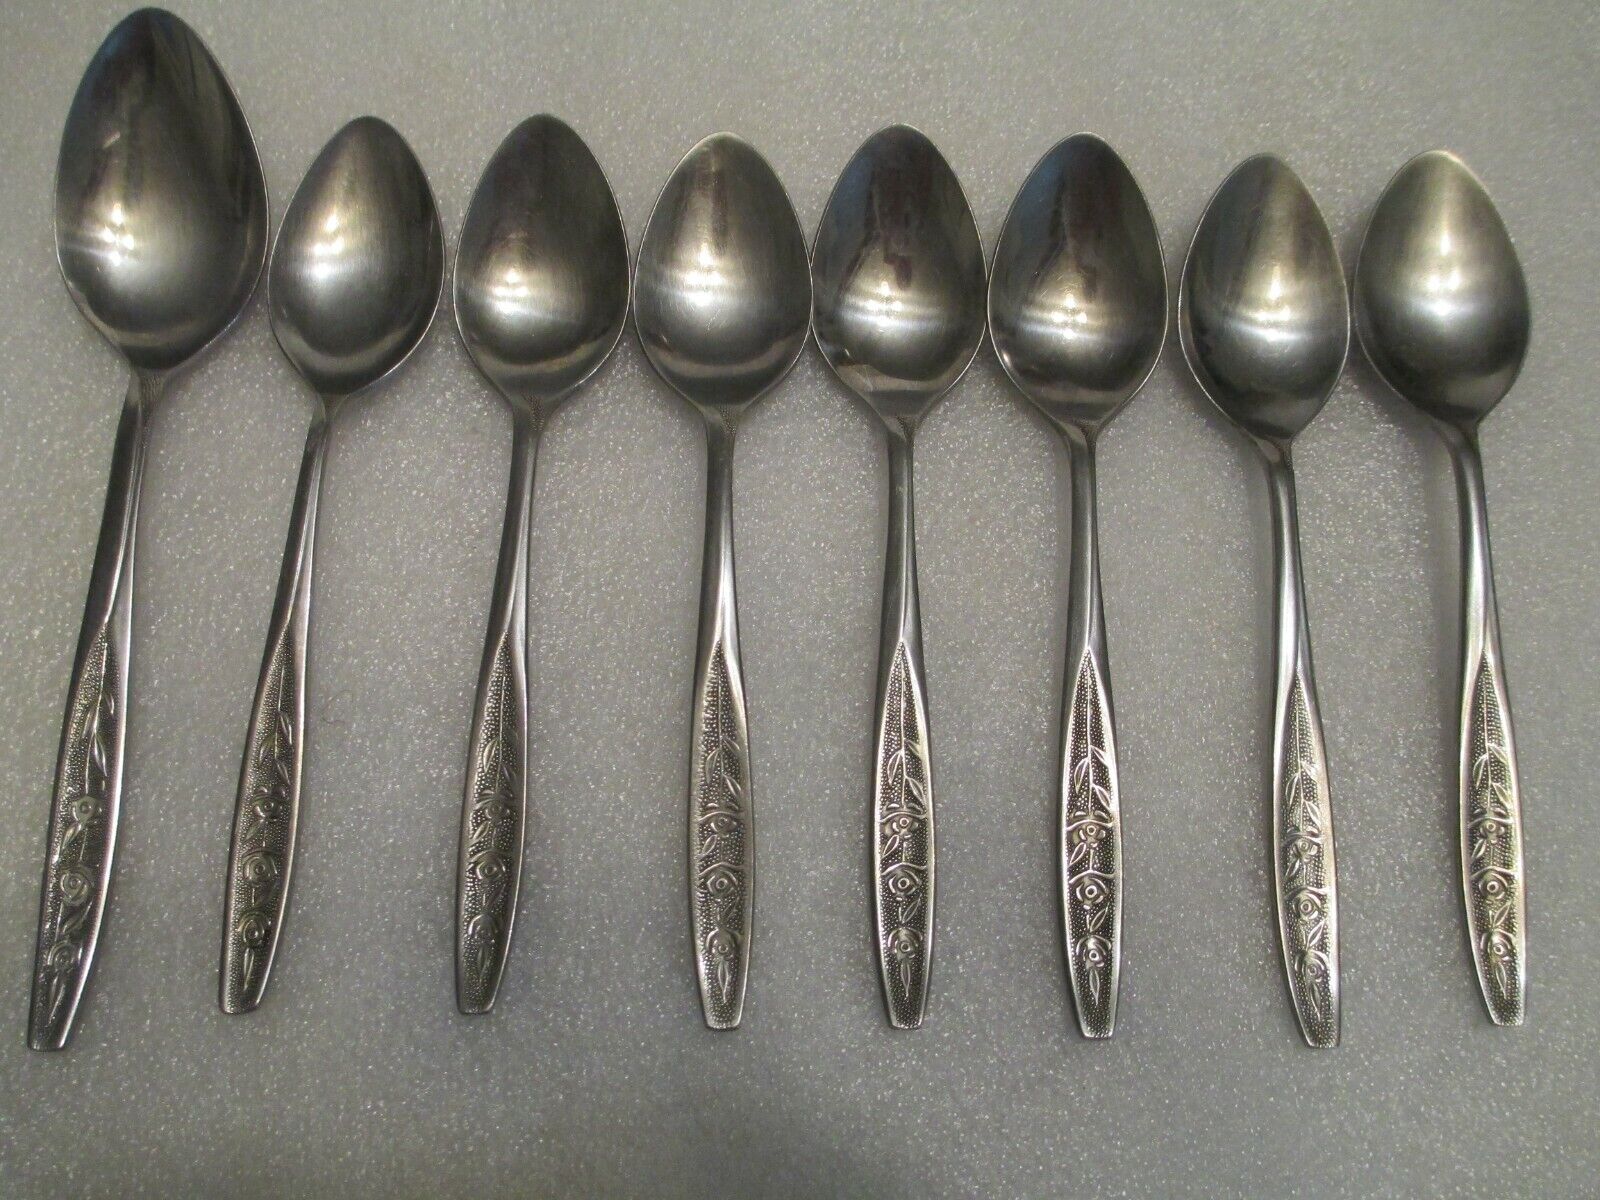 Customcraft Textured Rose Floral Stainless Flatware Spoon lot of 8 Vintage